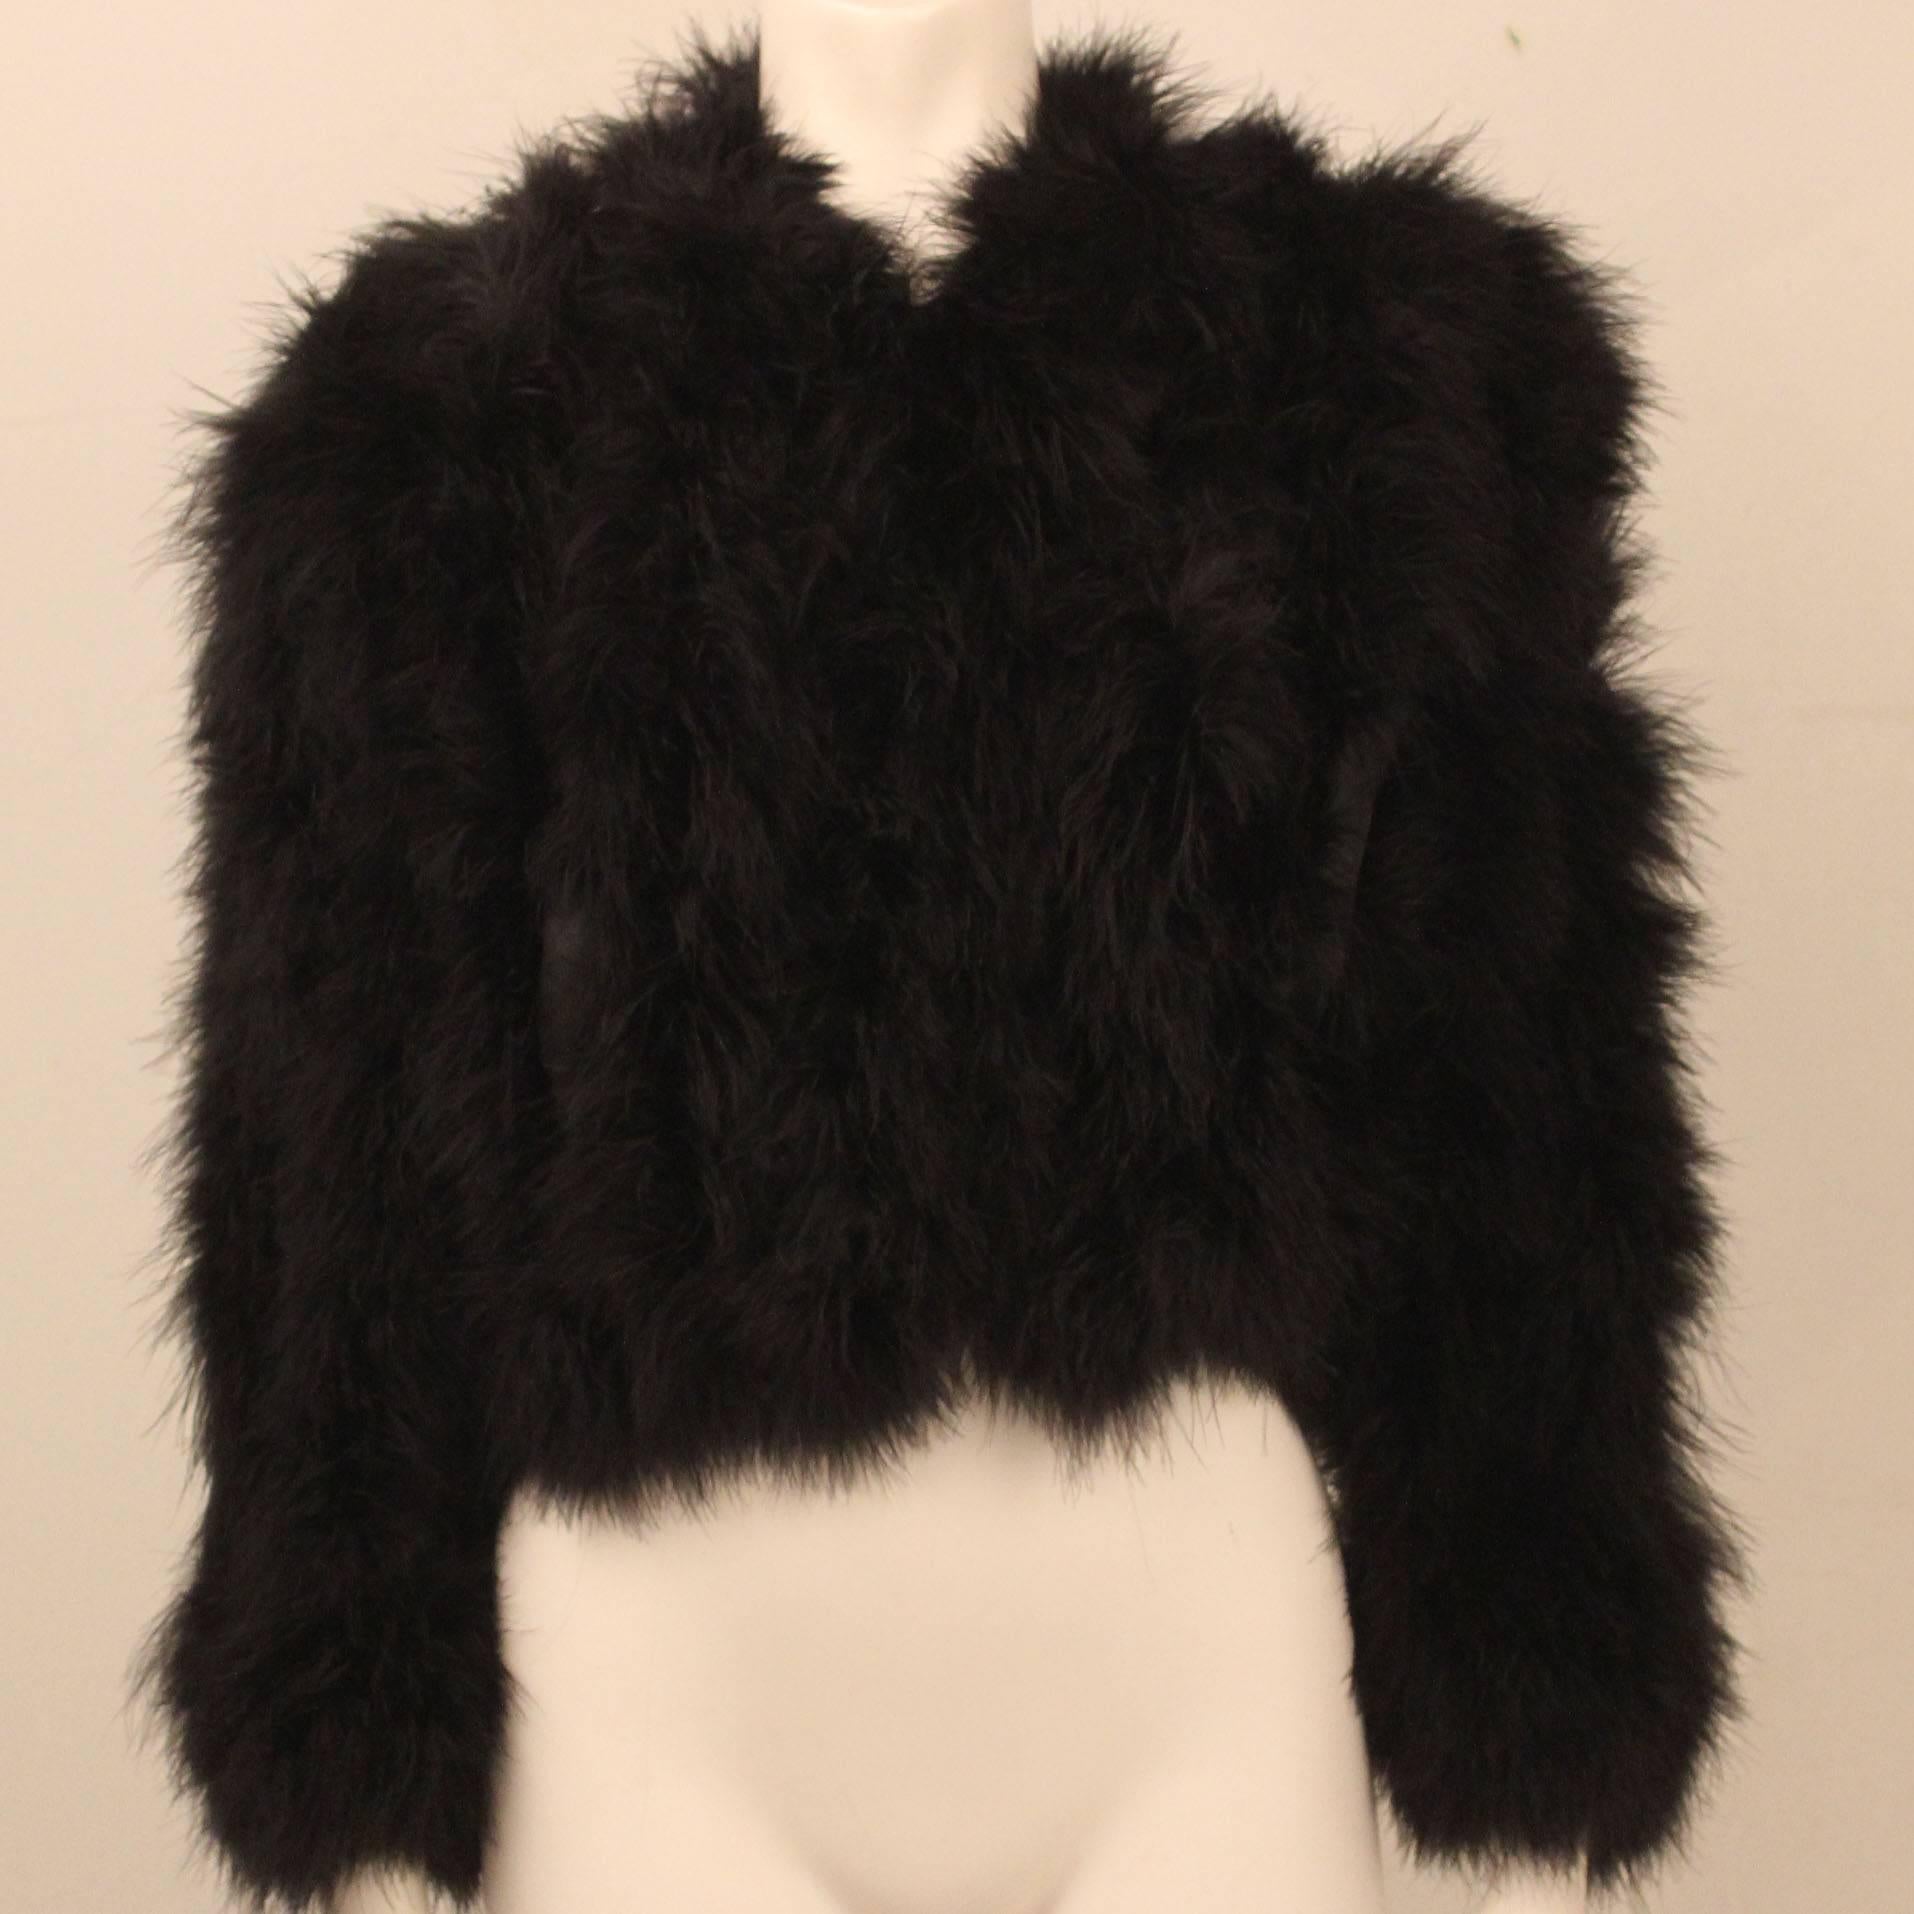 In impeccable, never worn condition-this cropped marabou jacket is an iconic piece of 1970s fashion history. Also known as a 